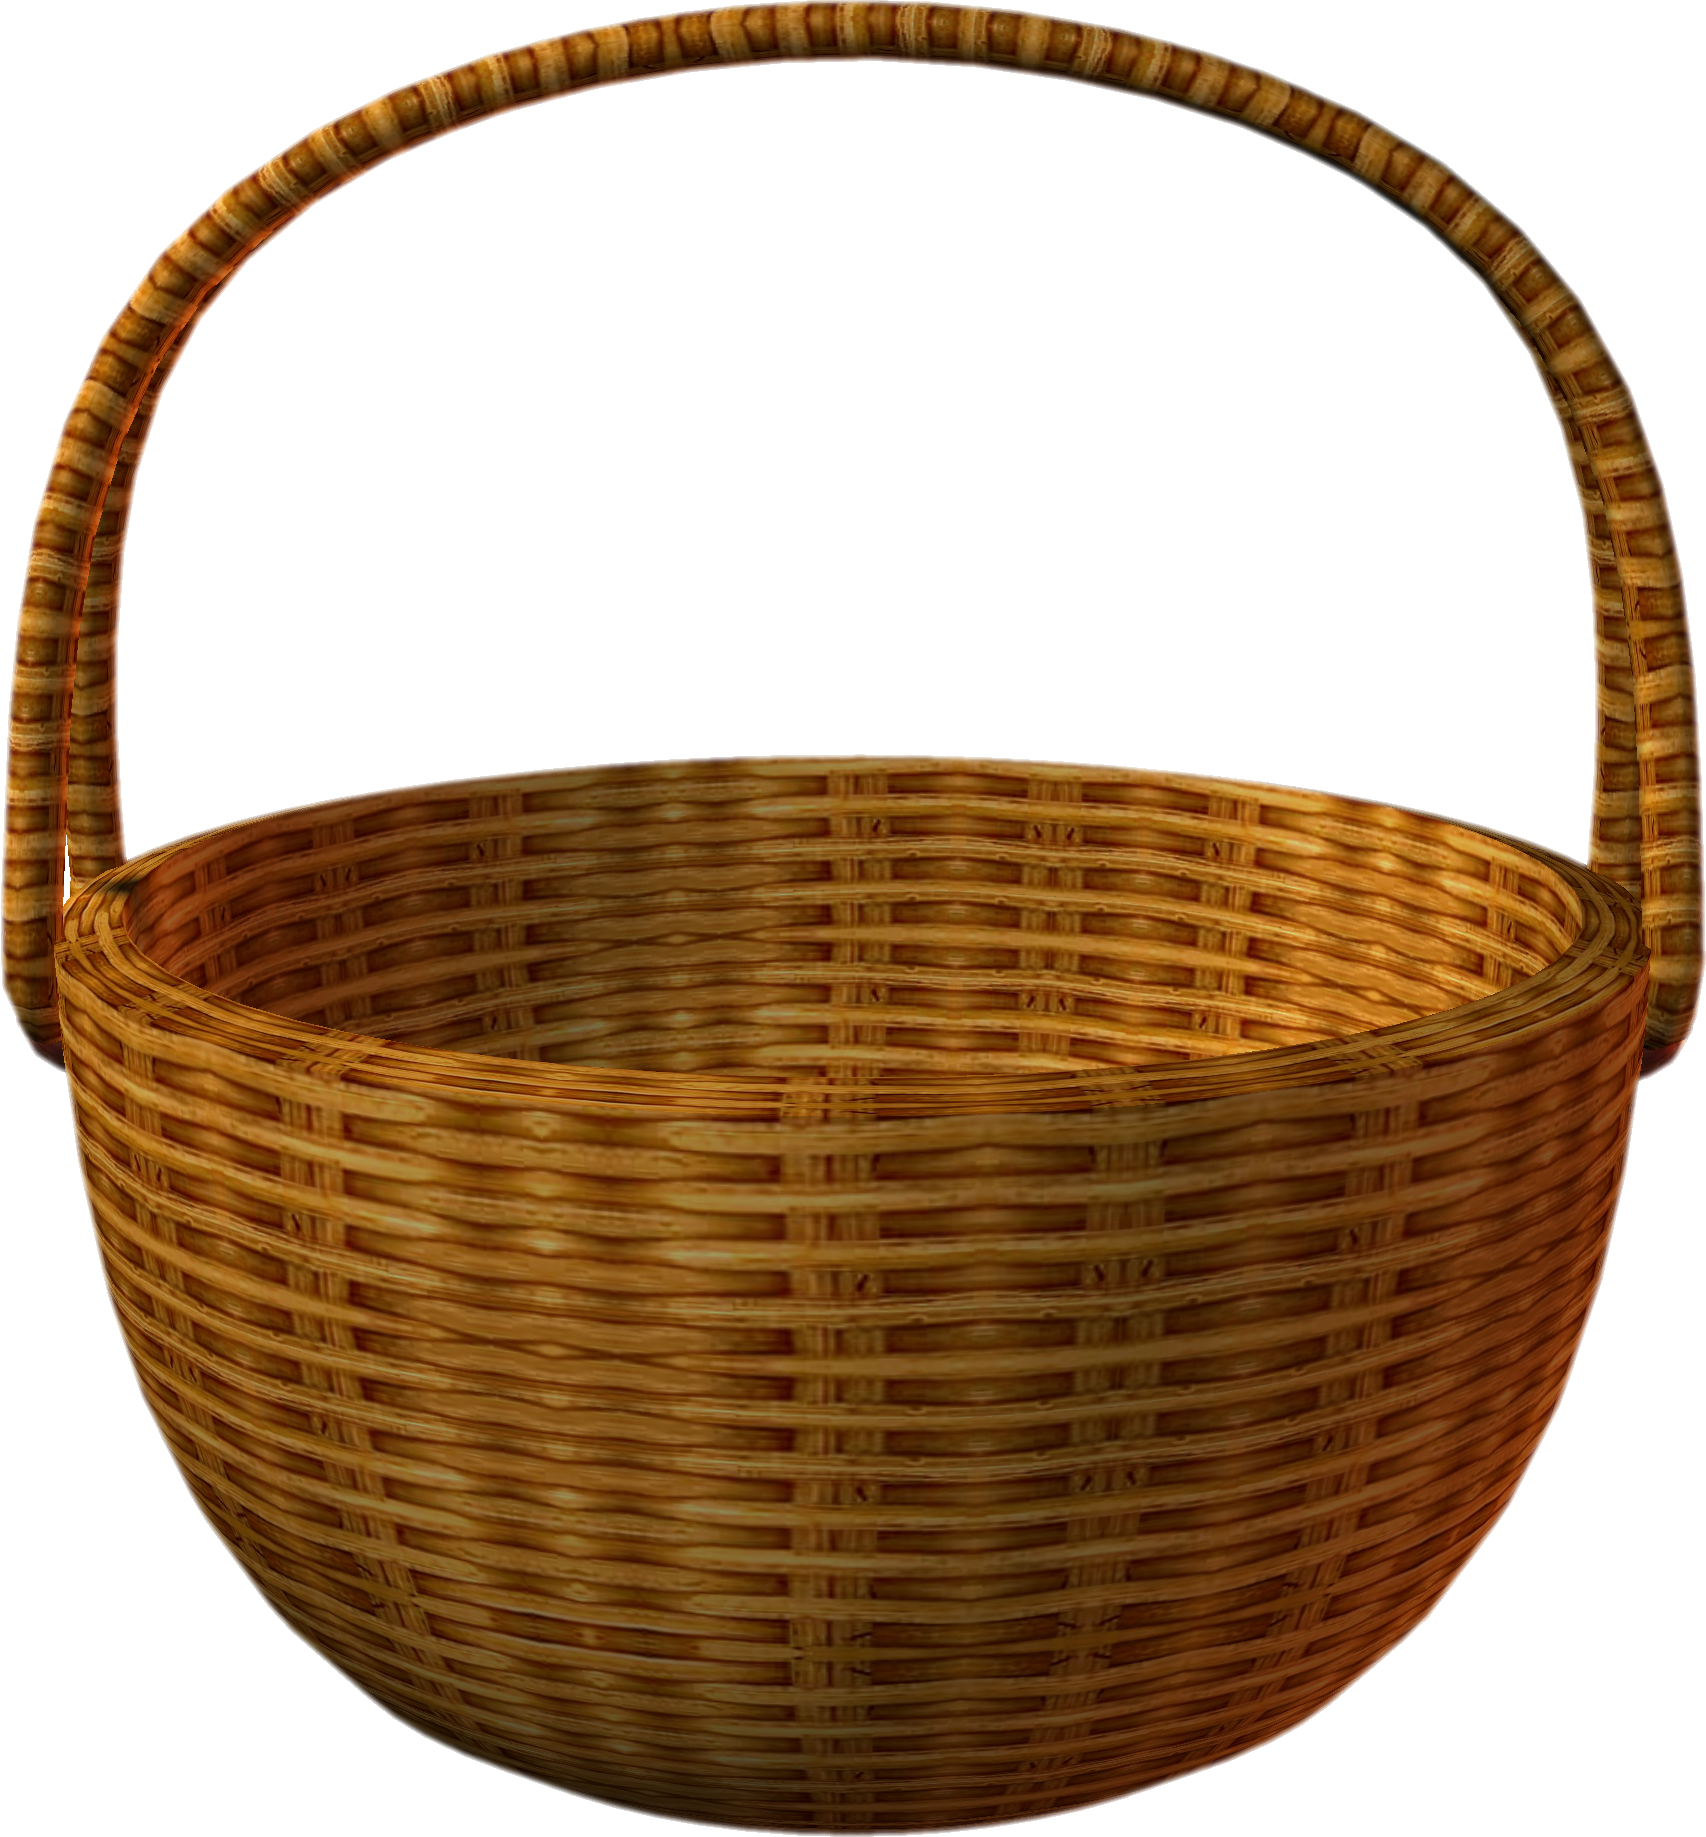 A Basket With A Handle